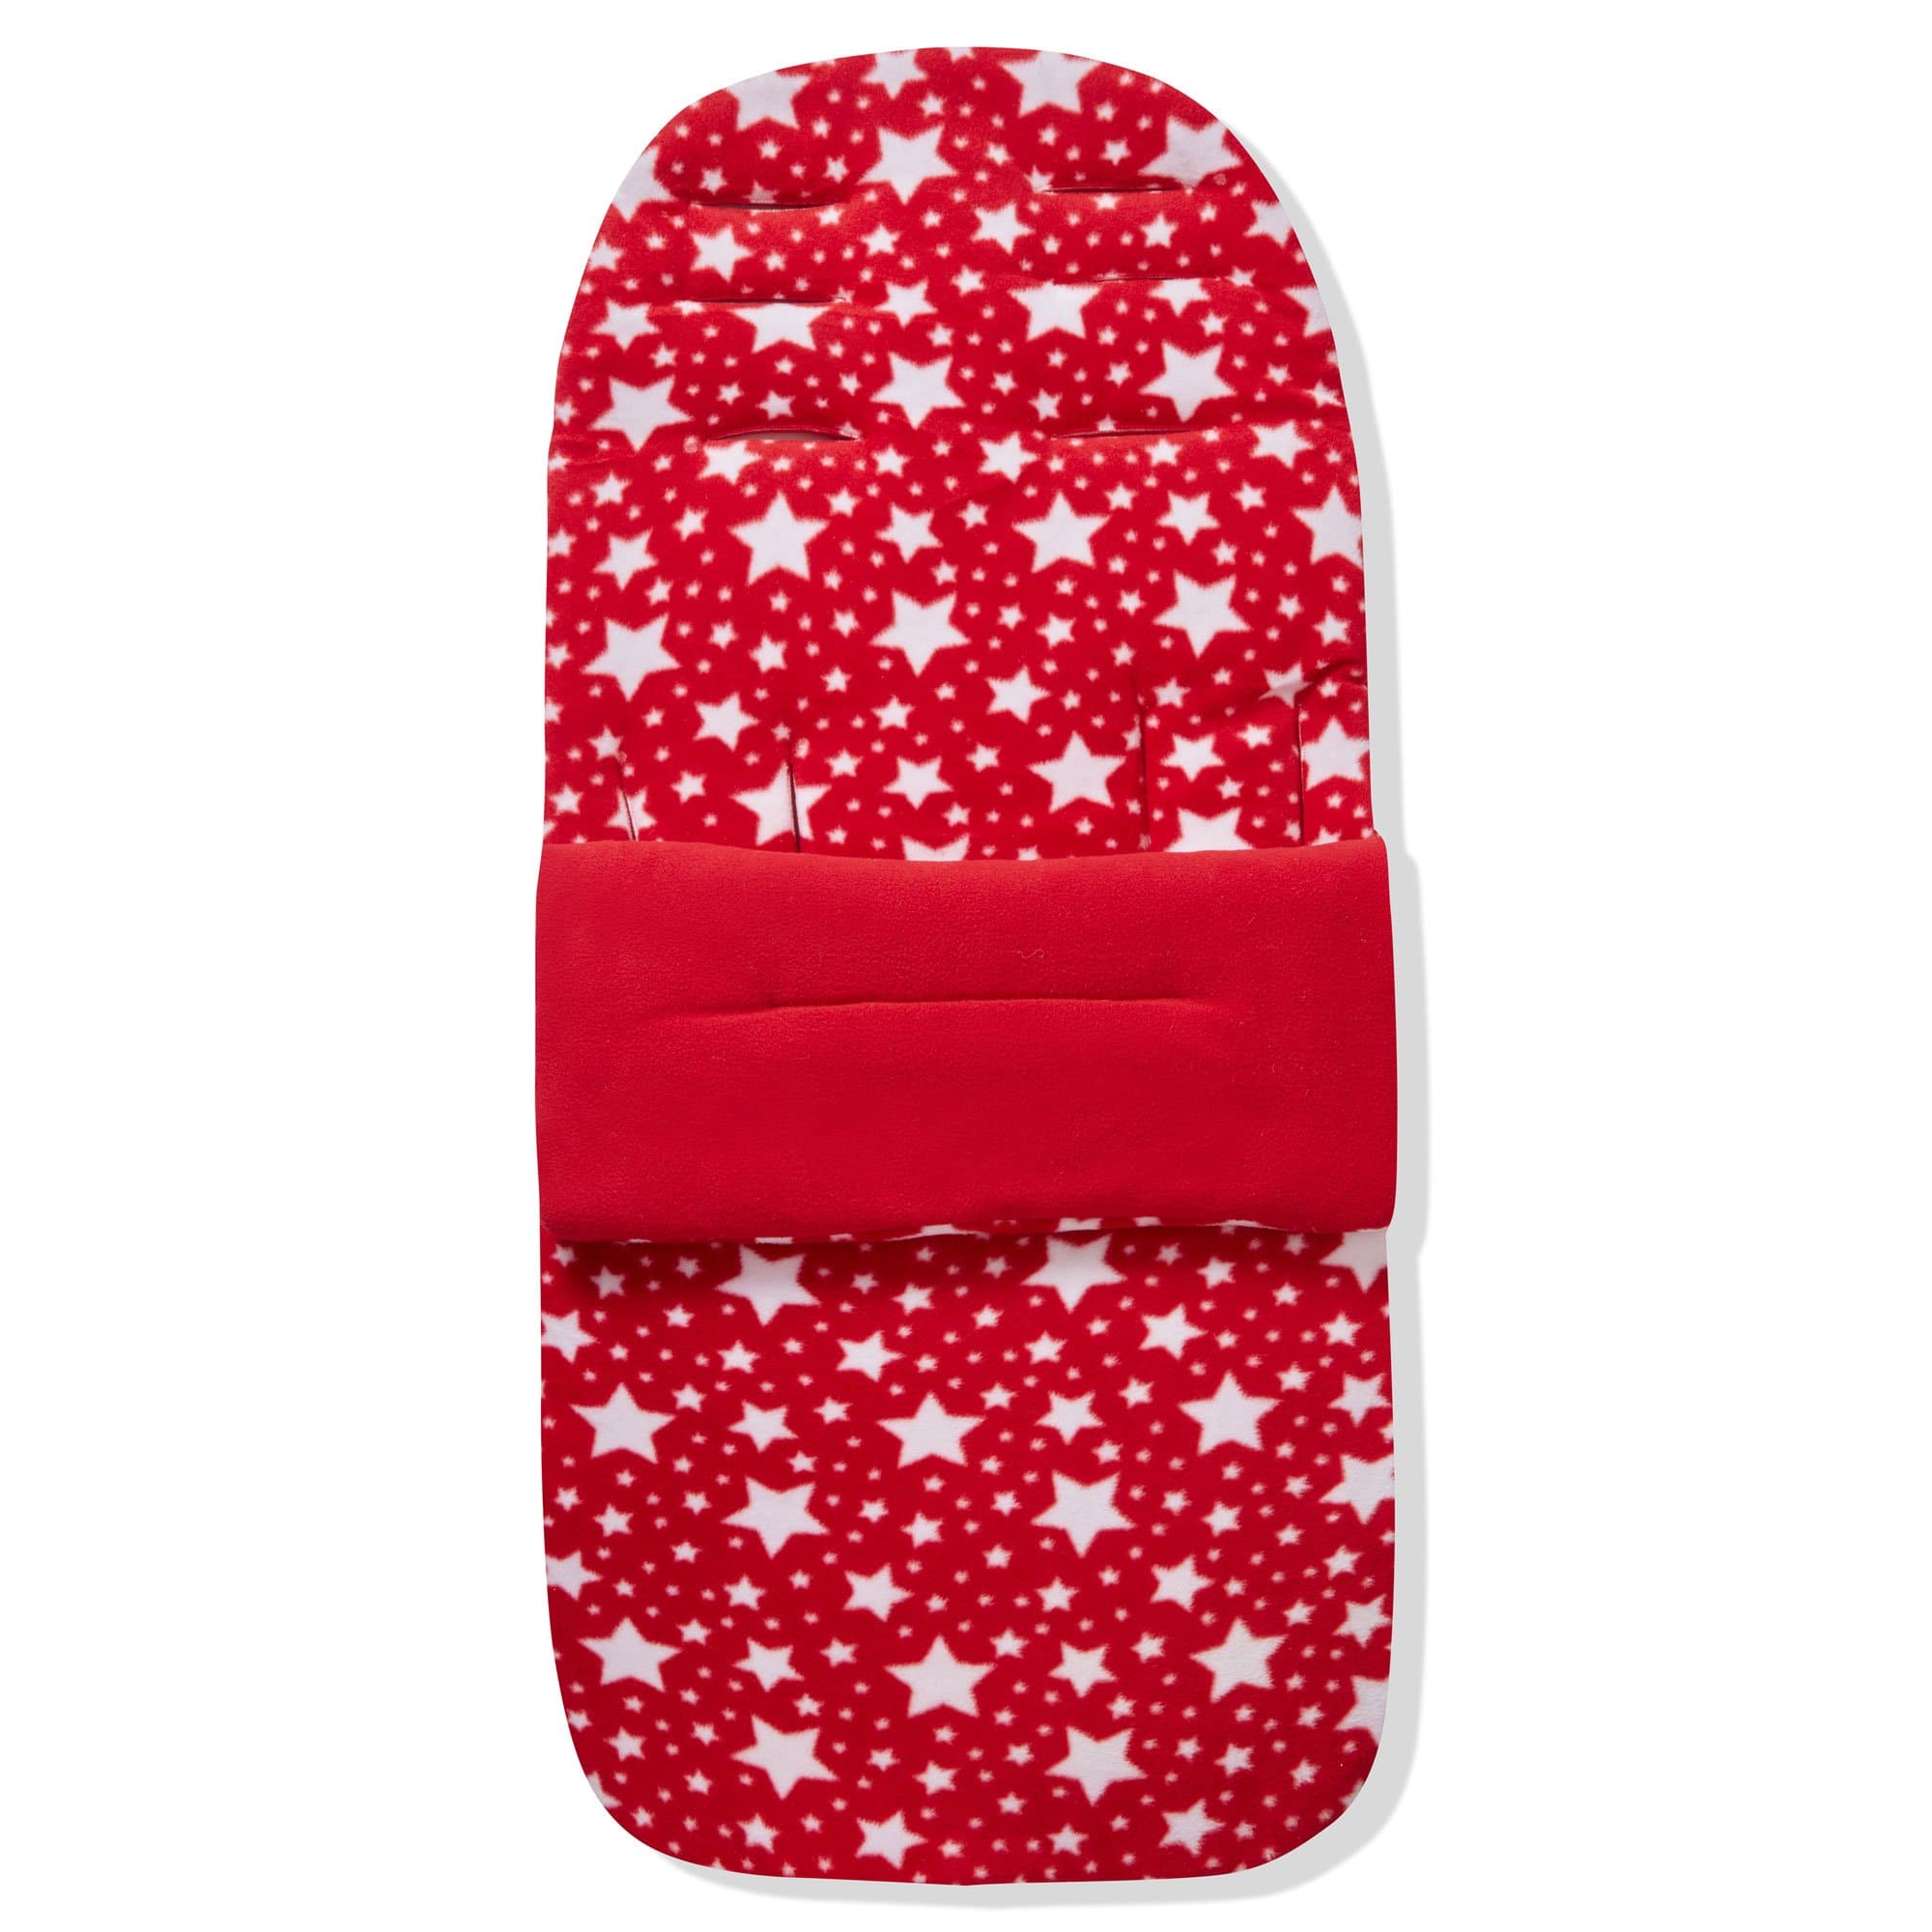 Fleece Footmuff / Cosy Toes Compatible with Excel - Red Star / Fits All Models | For Your Little One